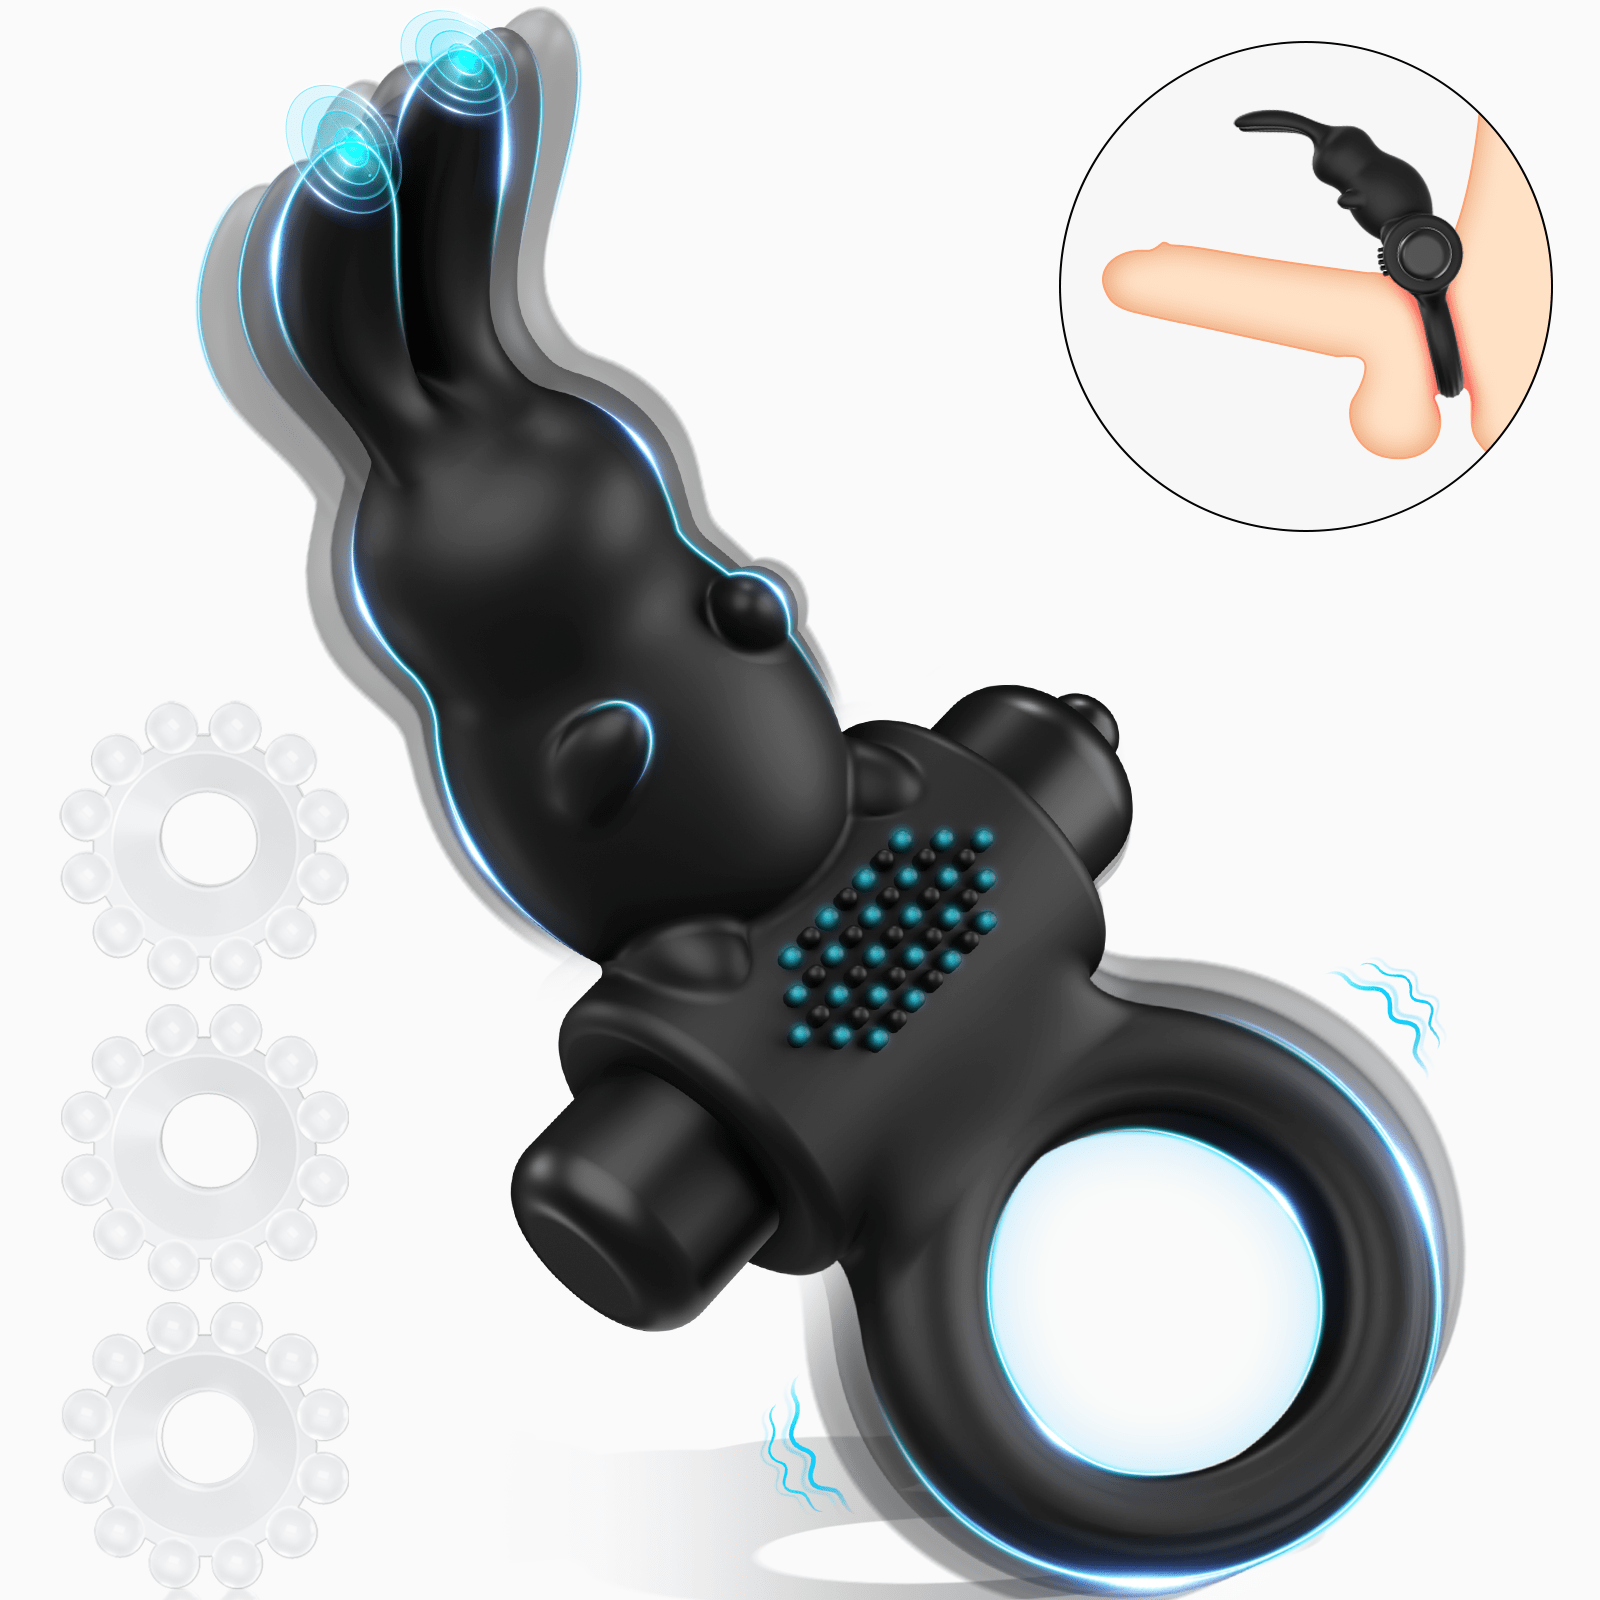 Rabbit Design Multiple Wearing Penis Ring with 10 Vibrating Modes